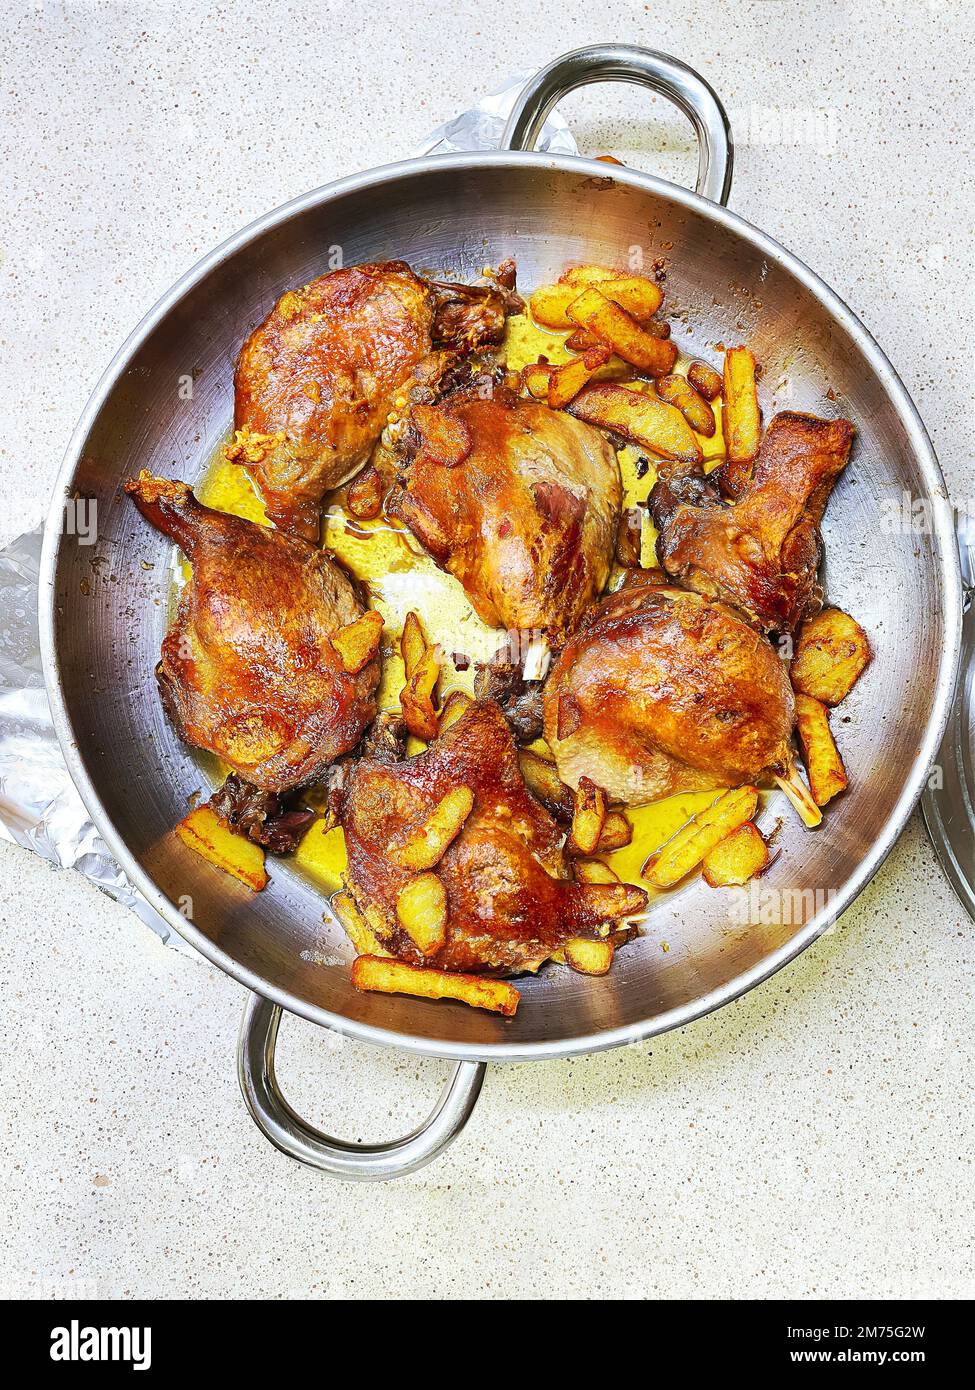 Confit de Canard with a side of fries, a traditional French dish made from duck legs. Stock Photo